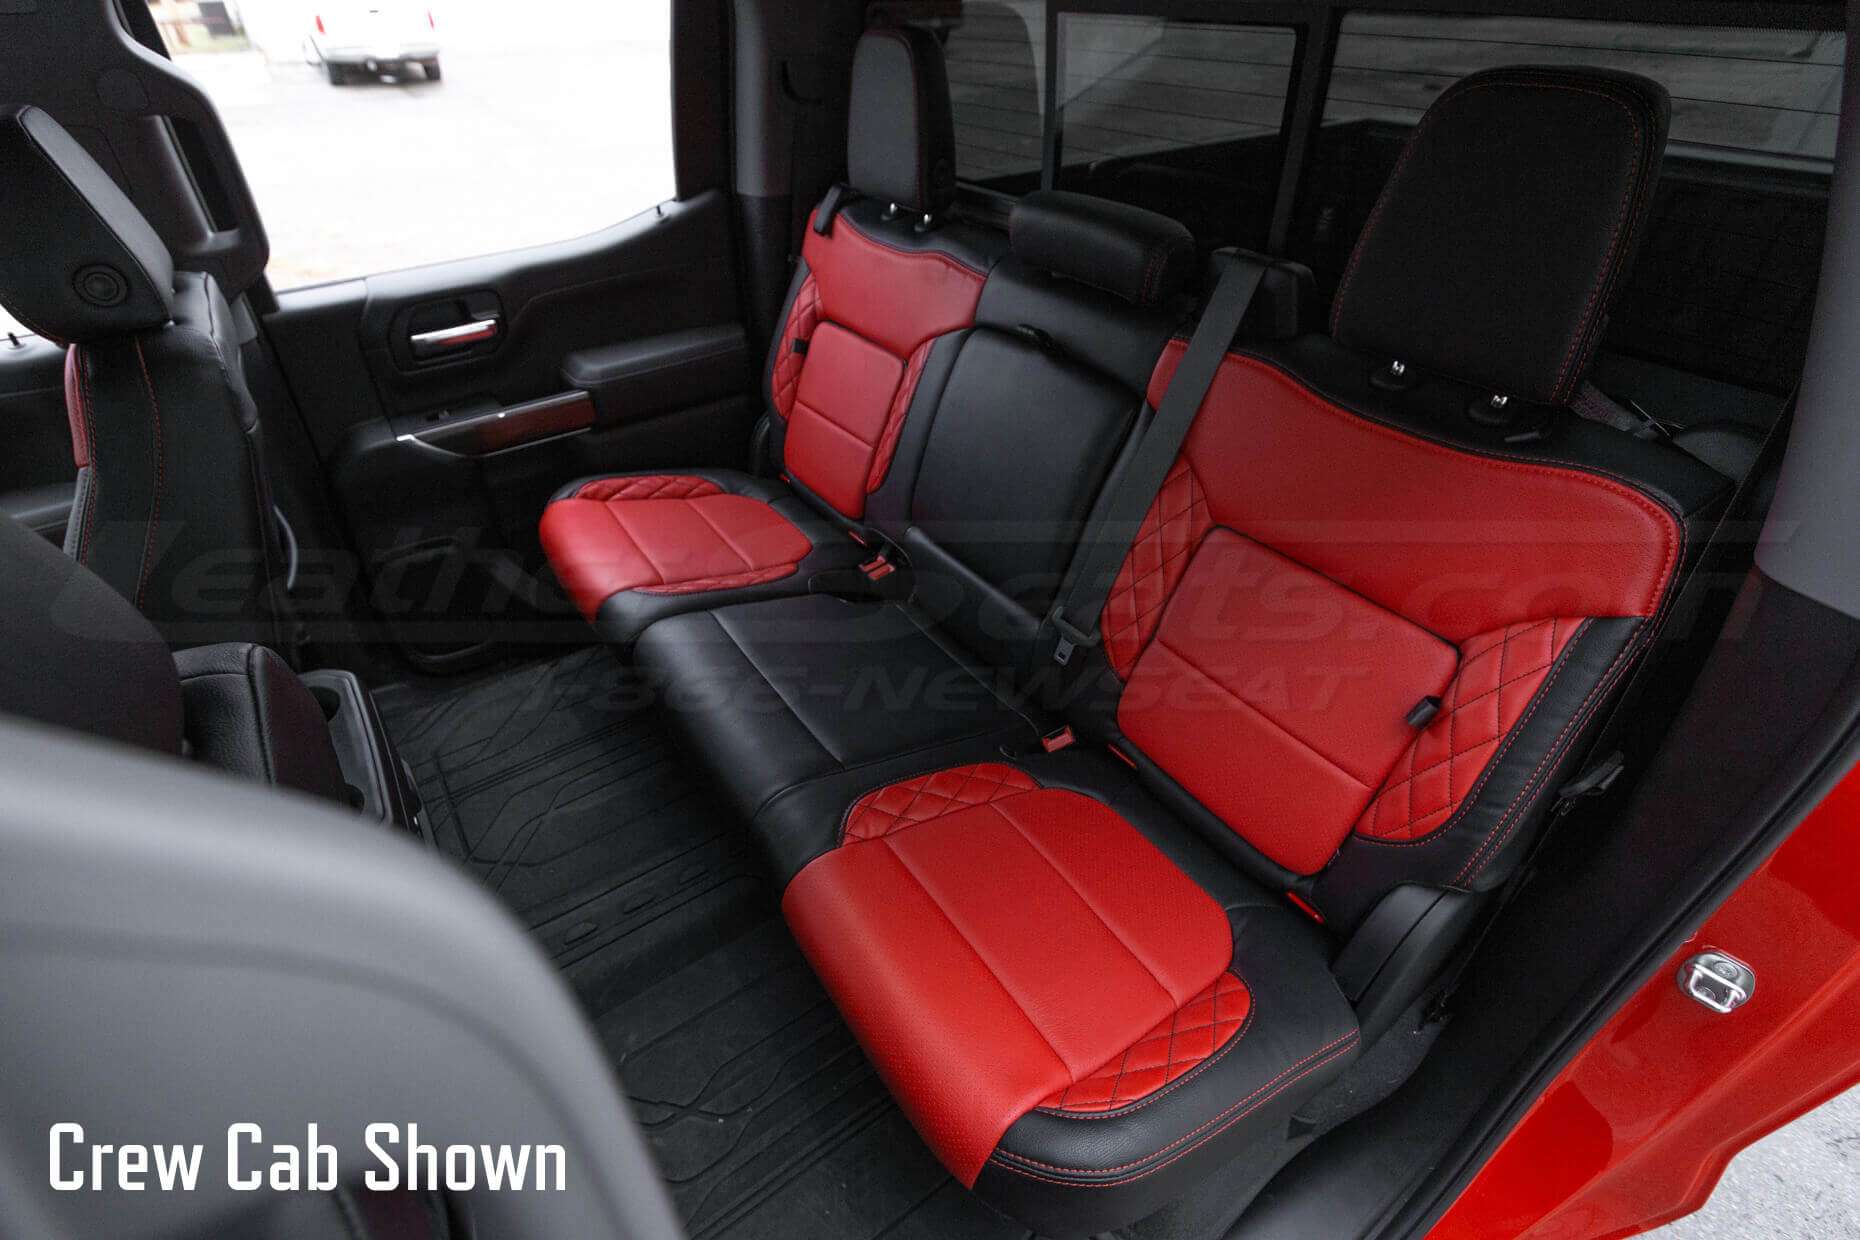 2019-2021 Chevrolet Silverado CNC Stitched Leather Seats Rear seating with custom stitched wings